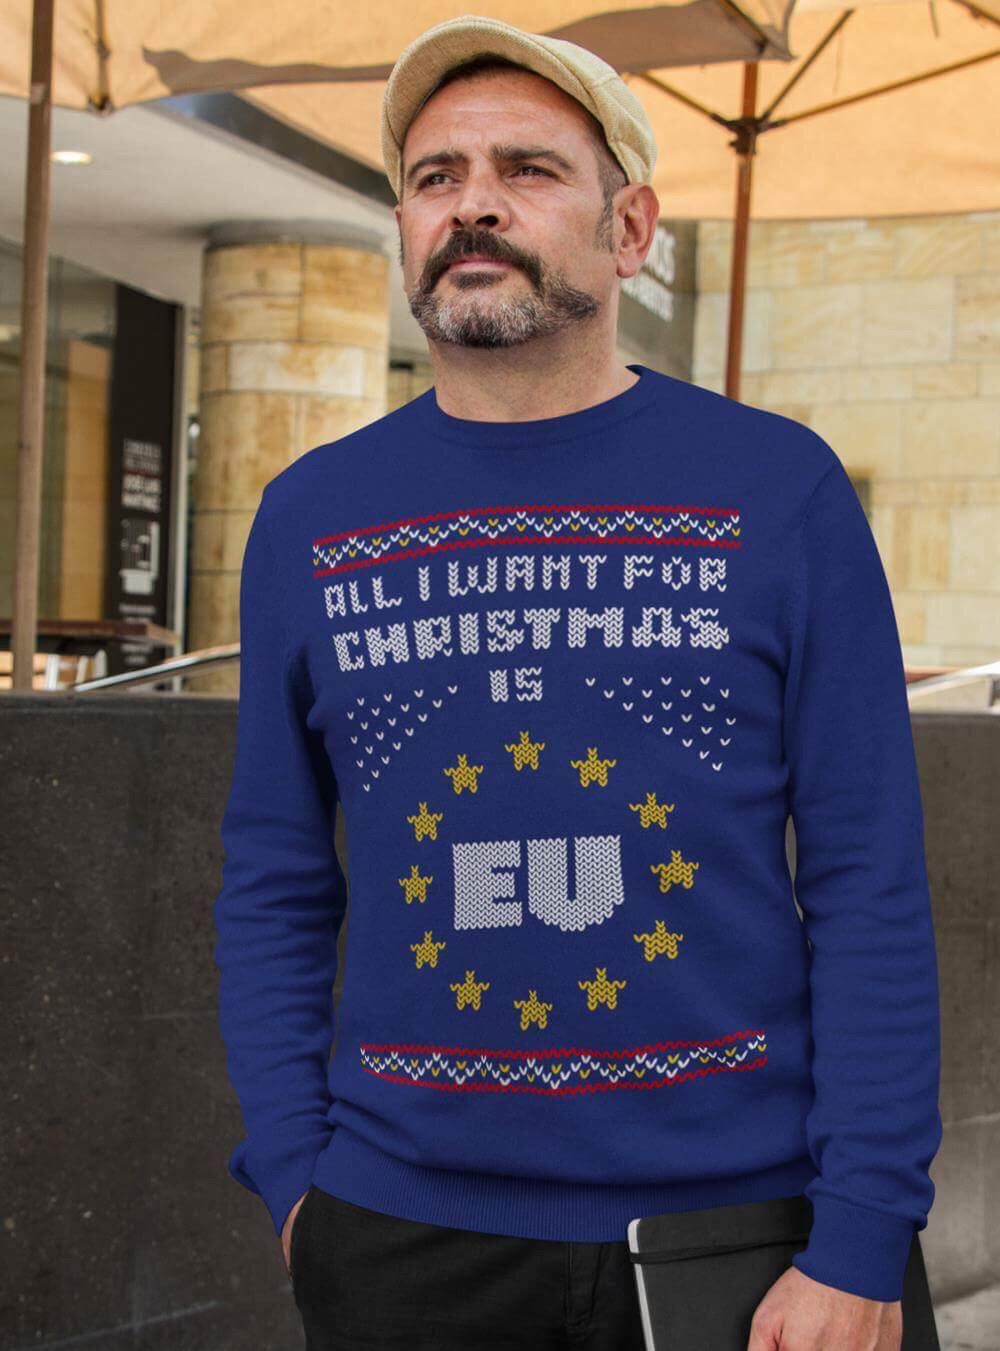 All I want for Christmas is EU Jumper